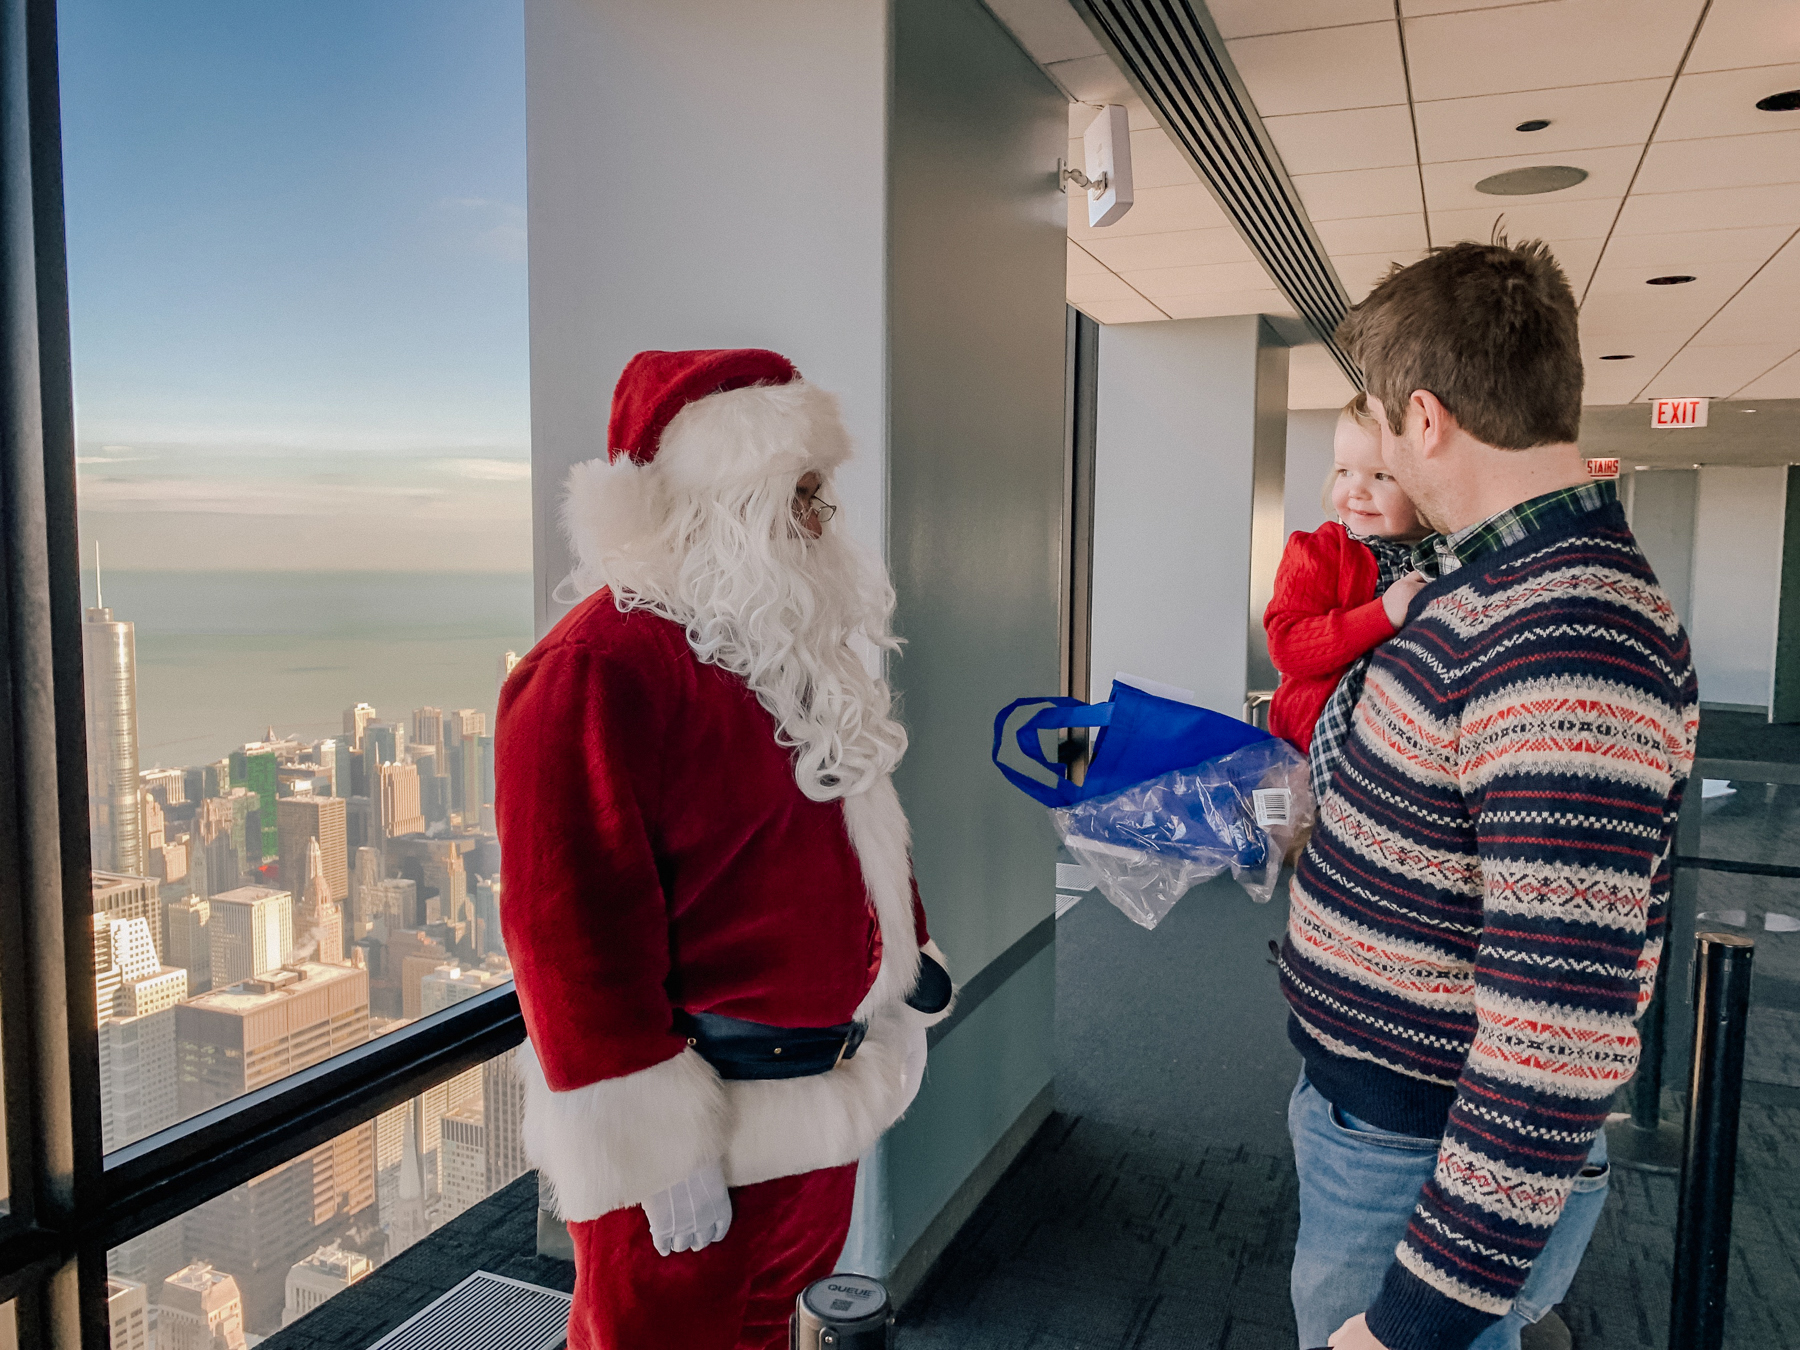 Kelly in the City - Meeting Santa on the Willis Tower Skydeck